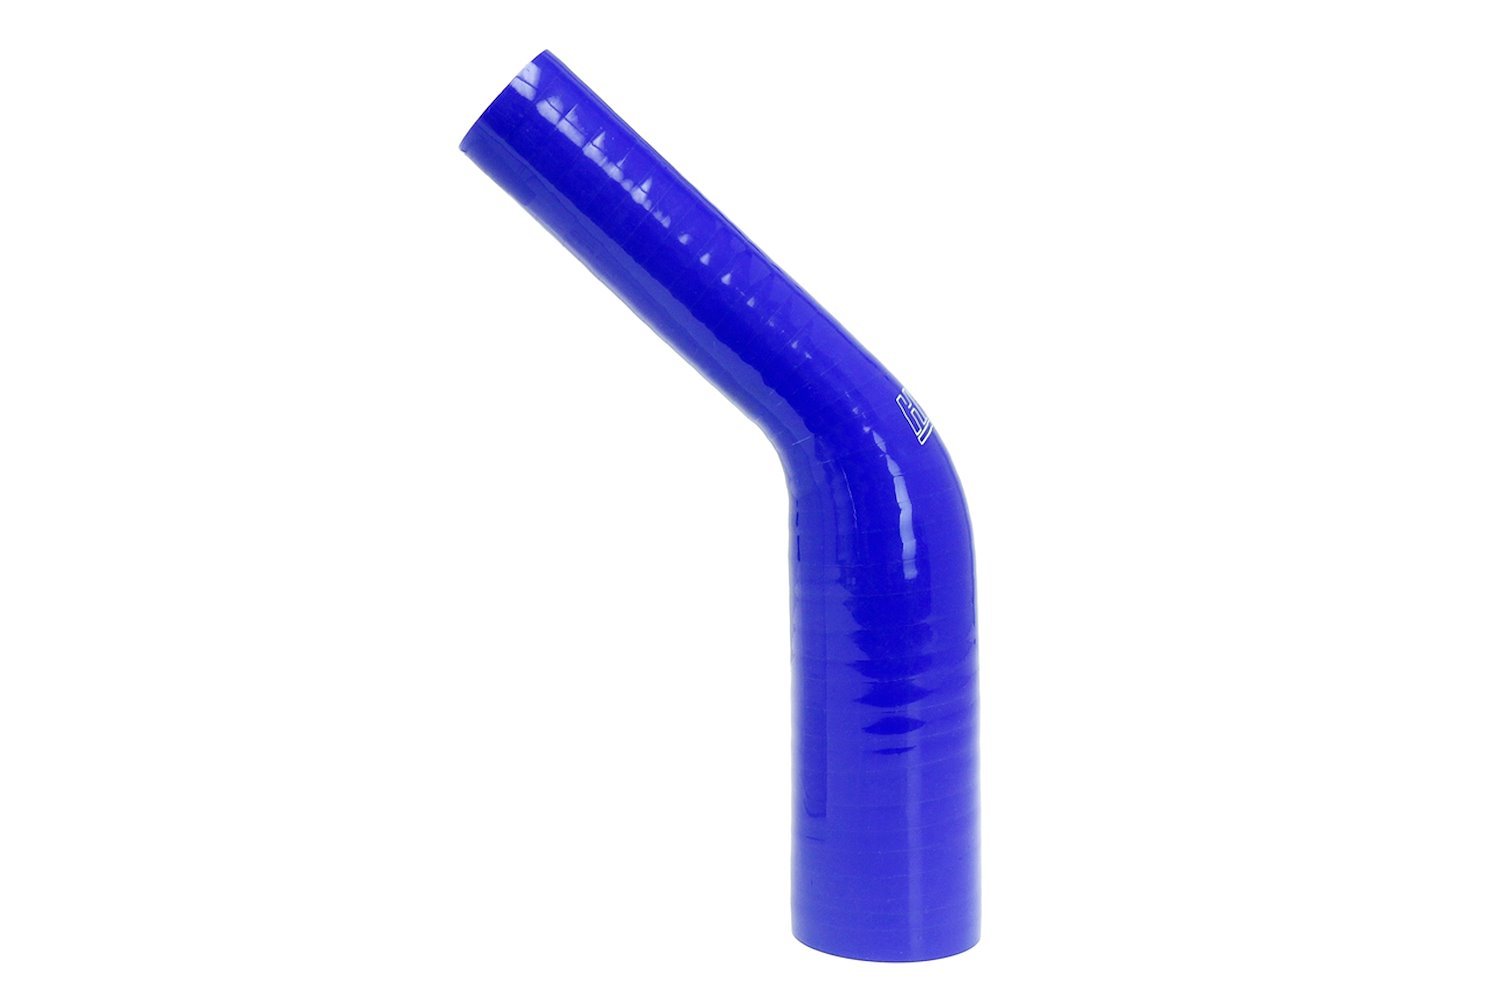 HTSER45-100-175-BLUE Silicone 45-Degree Elbow Hose, High-Temp 4-Ply Reinforced, 1 in. - 1-3/4 in. ID, Blue